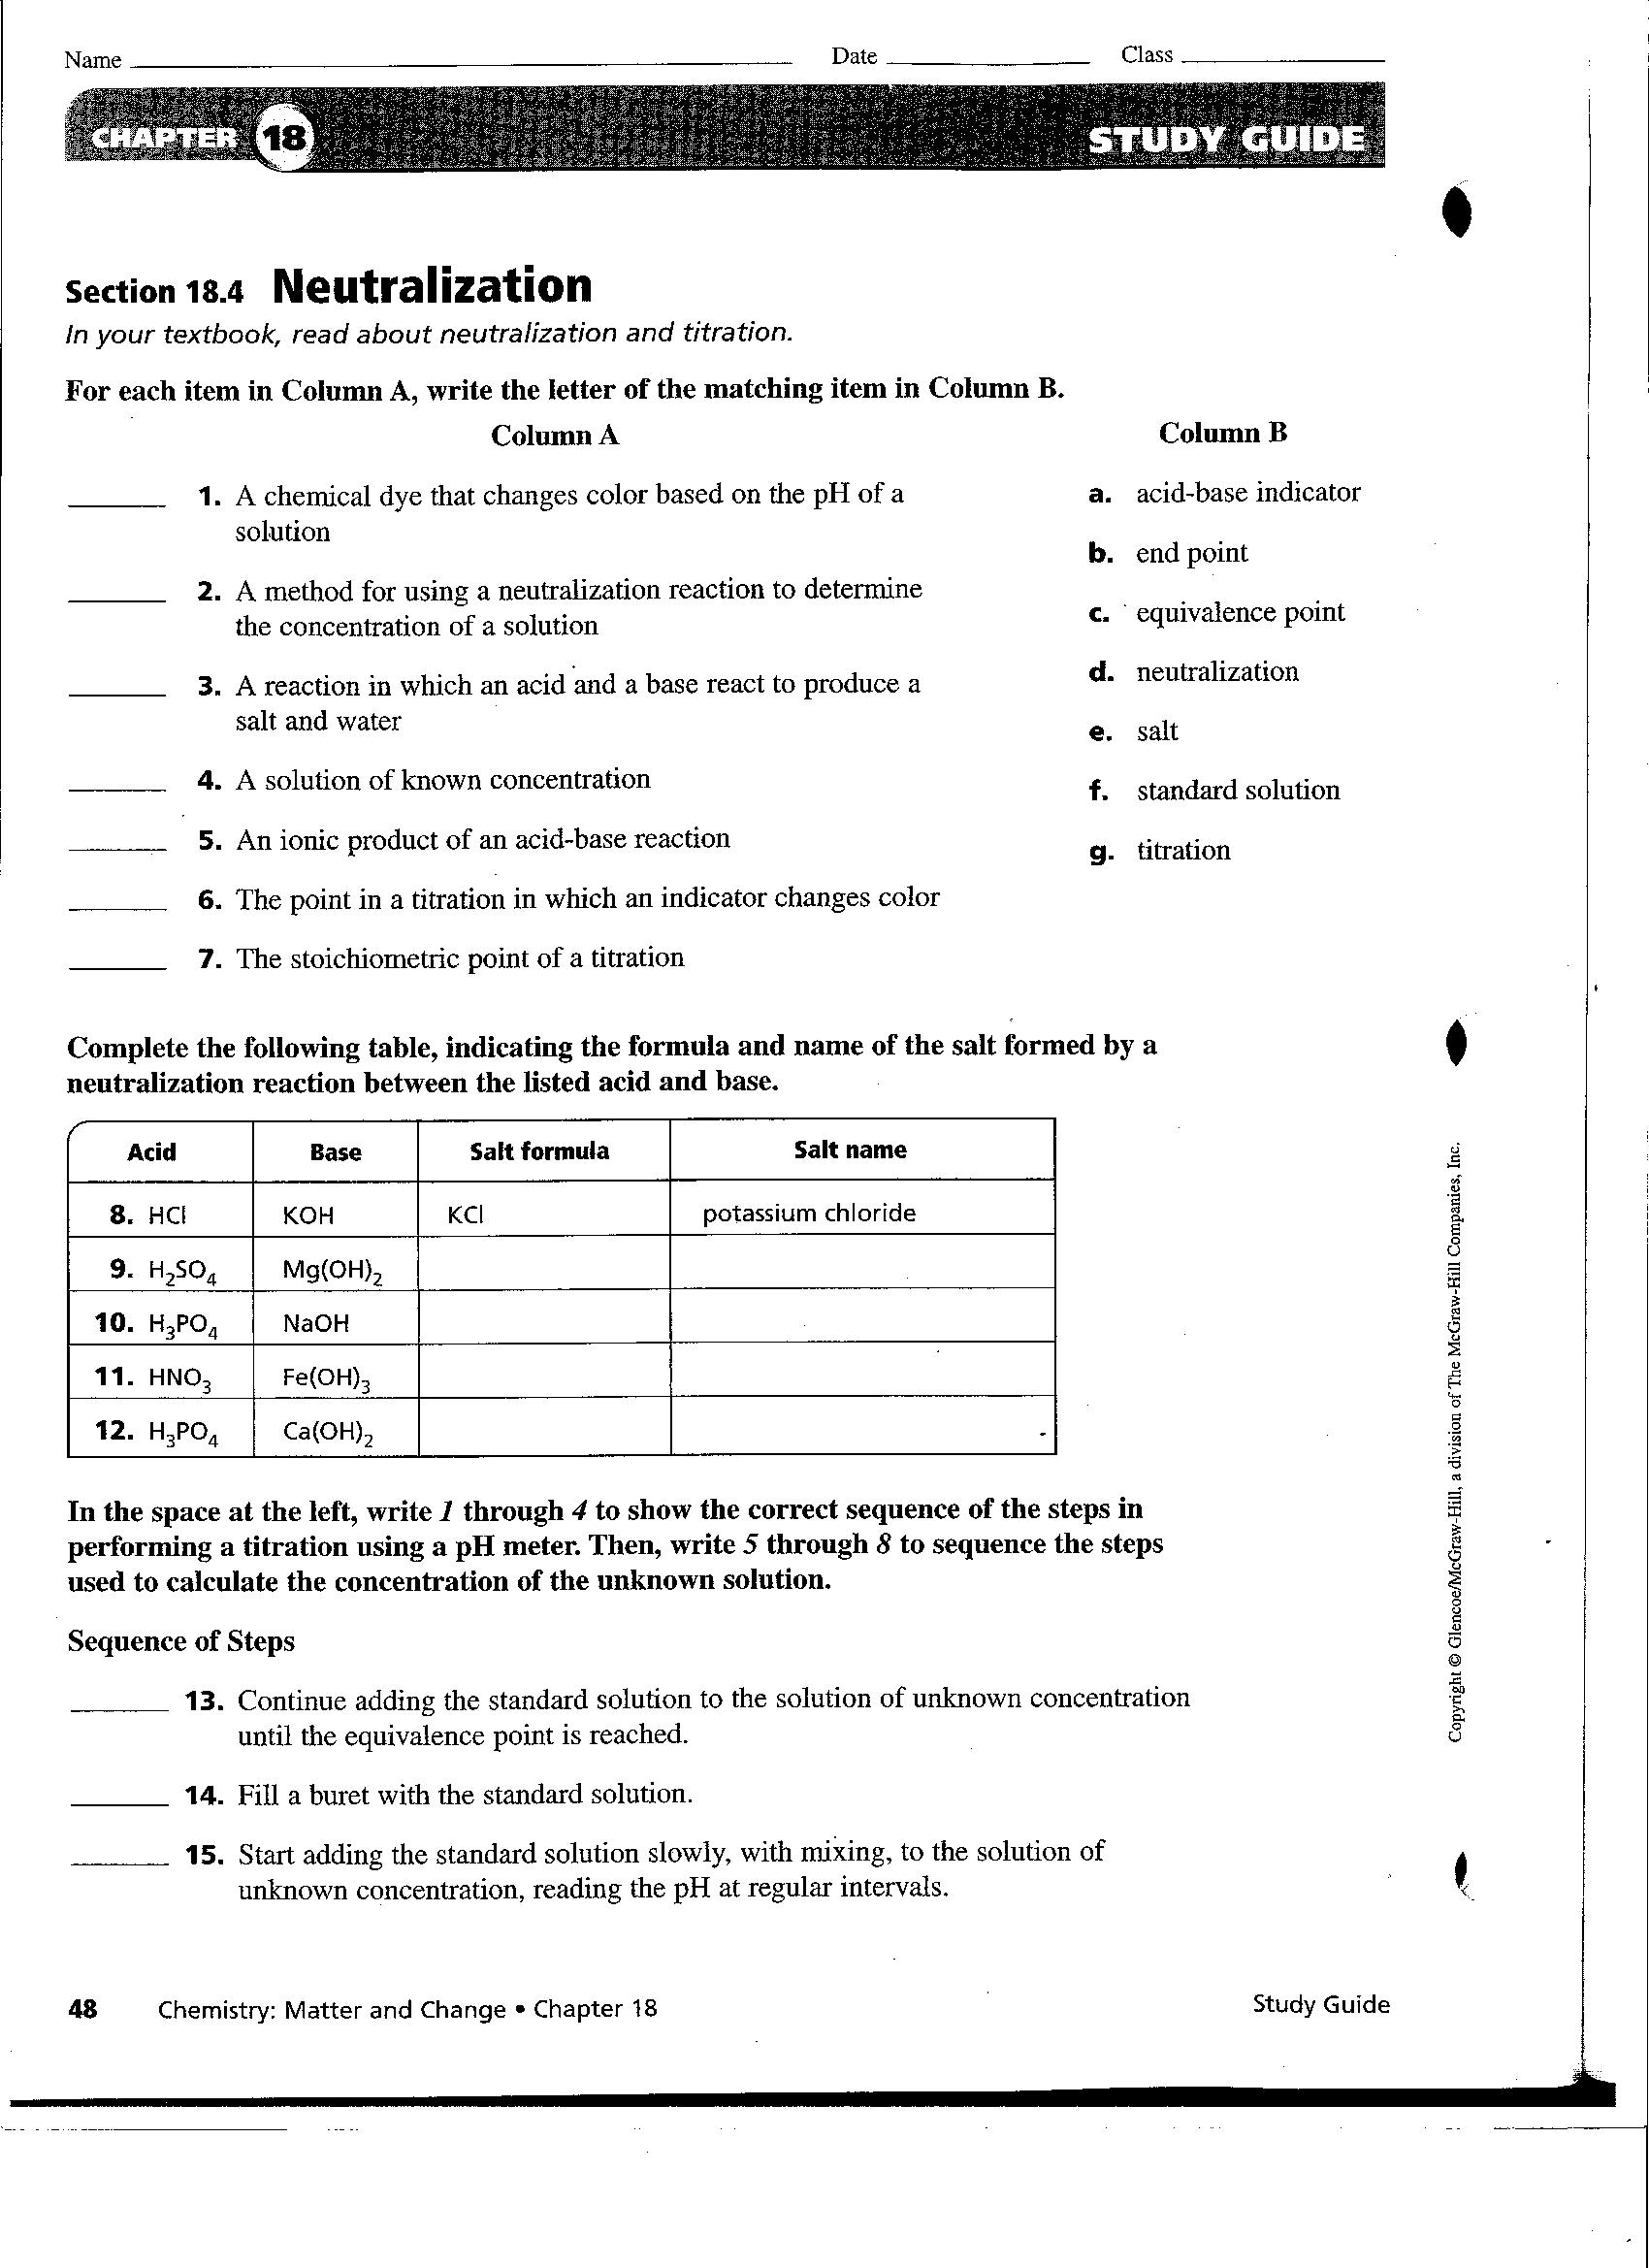 acid baase equilibria study guide answers